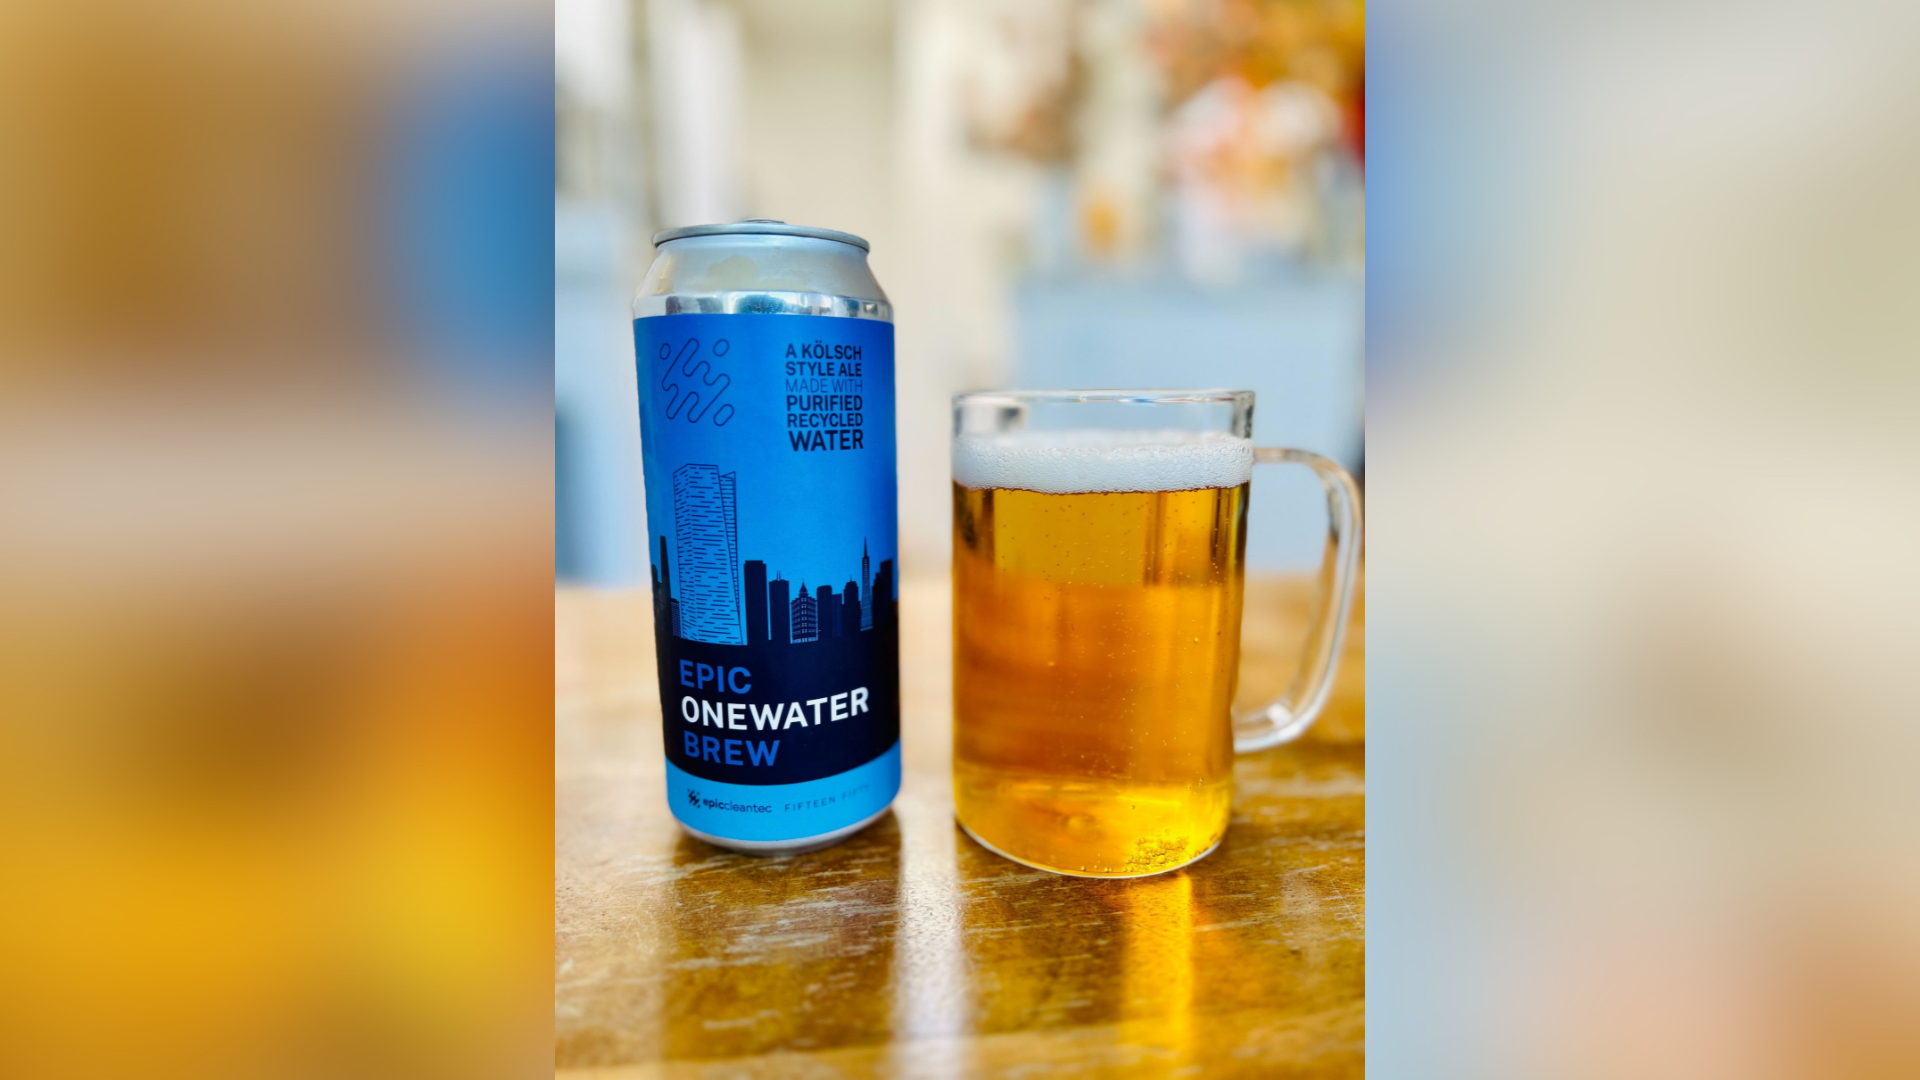 Epic OneWater Brew is a beer made with water recycled from the showers, sinks and washing machines ...